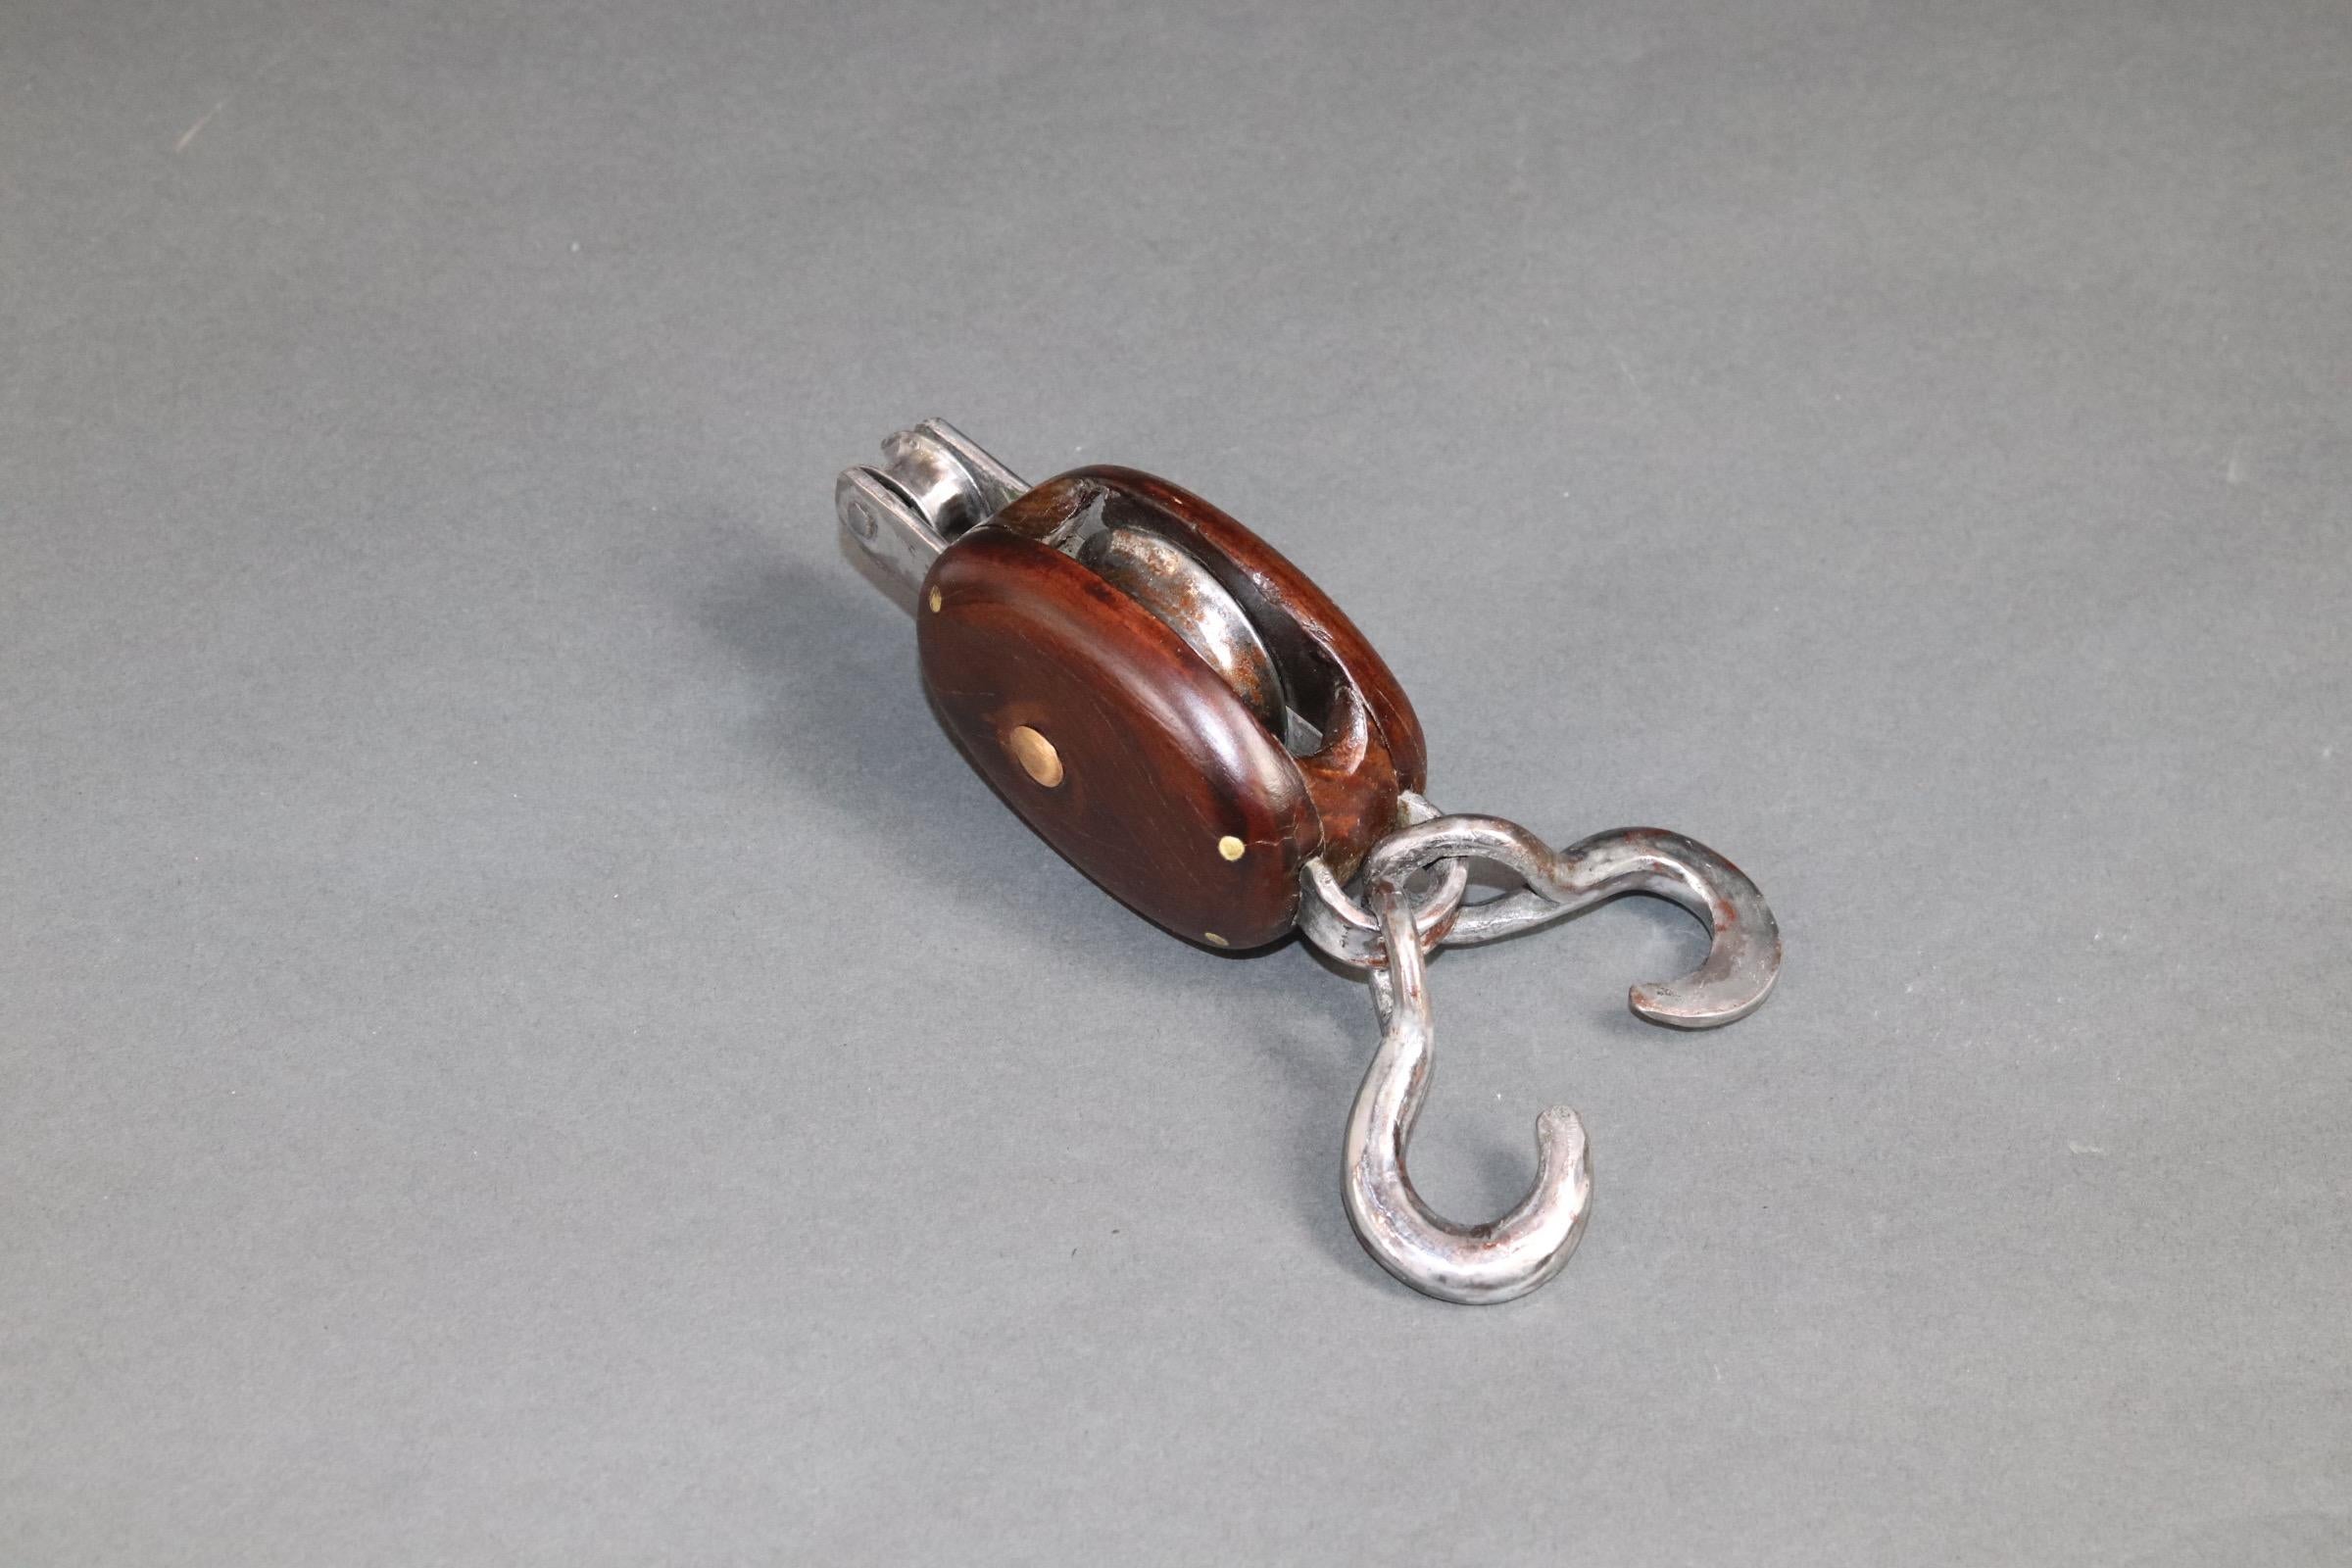 Varnished wood yachting pulley with polished hooks and tether ring. Weight is 1 pound. X-125